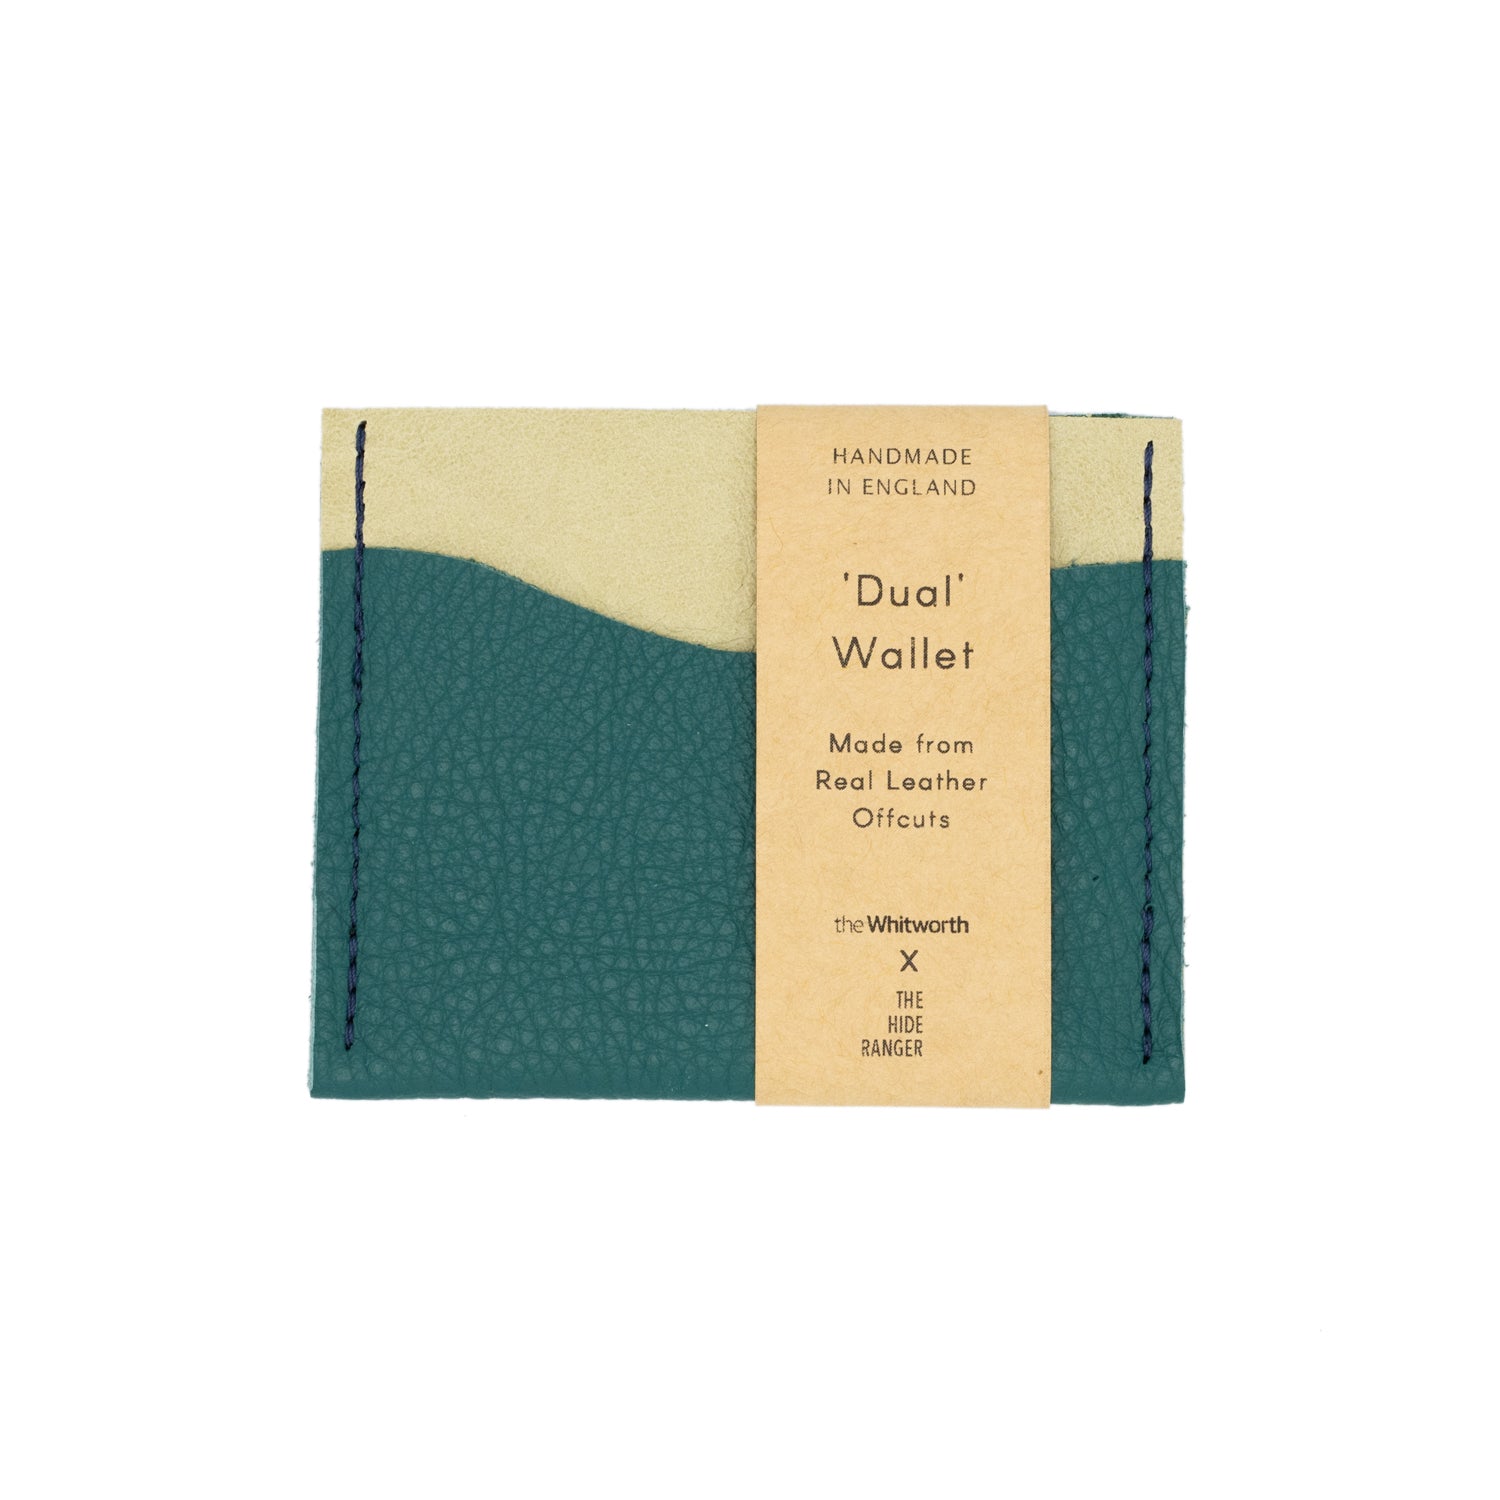 Image of green leather card wallet with label against white backdrop.